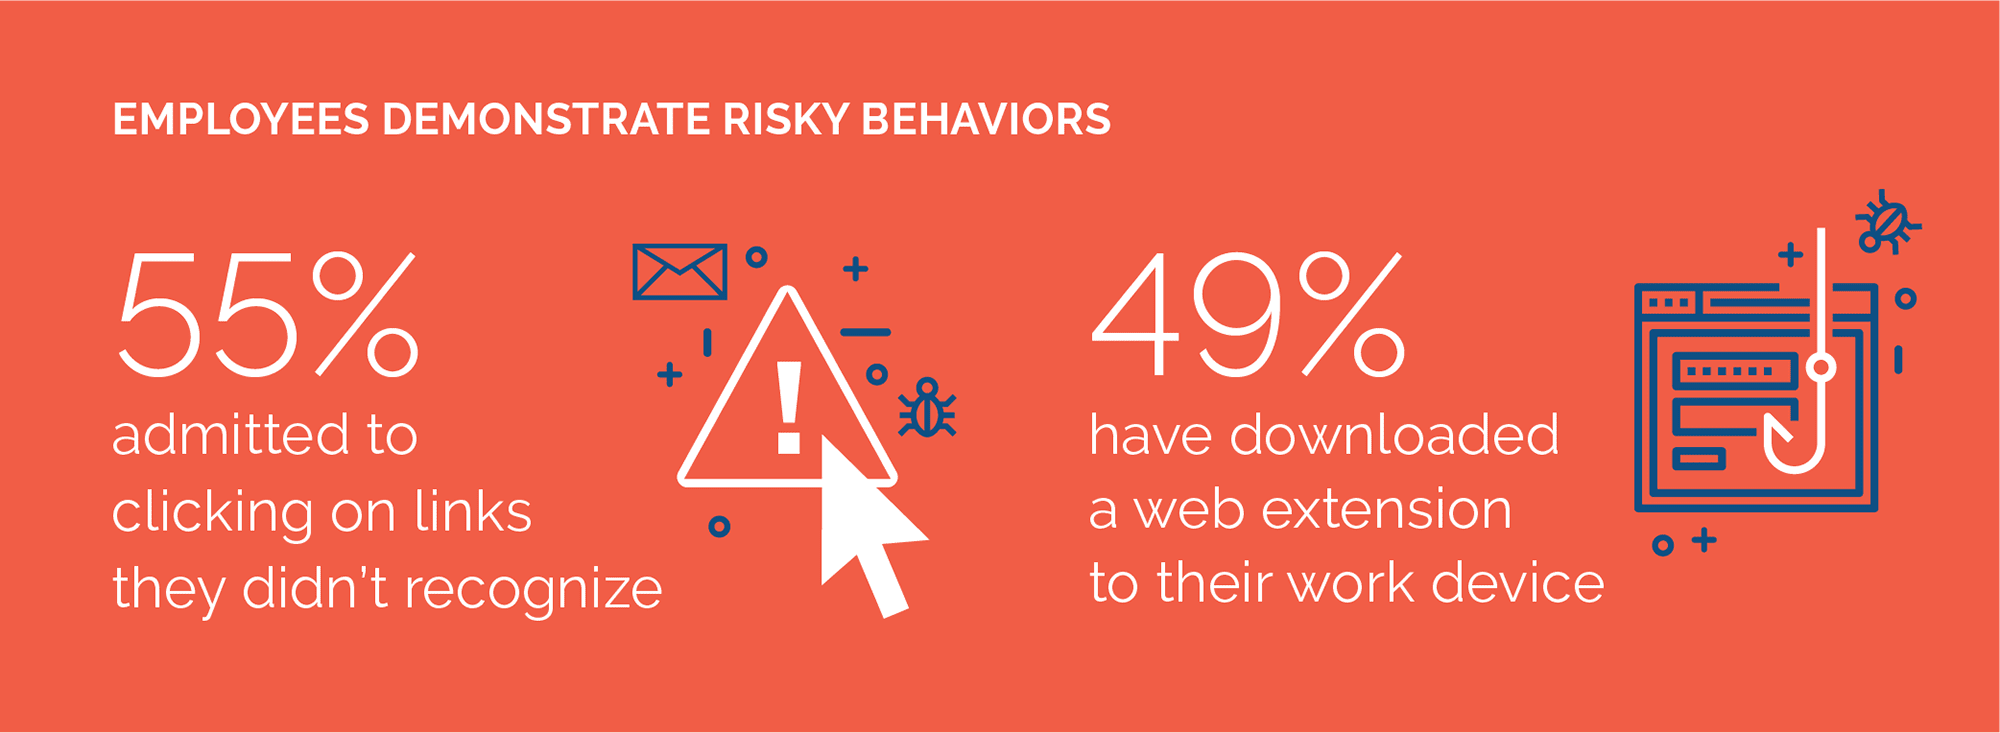 A data graphic showing that employees demonstrate risky behavior by clicking links they don't recognize and downloading web extensions to their work devices.